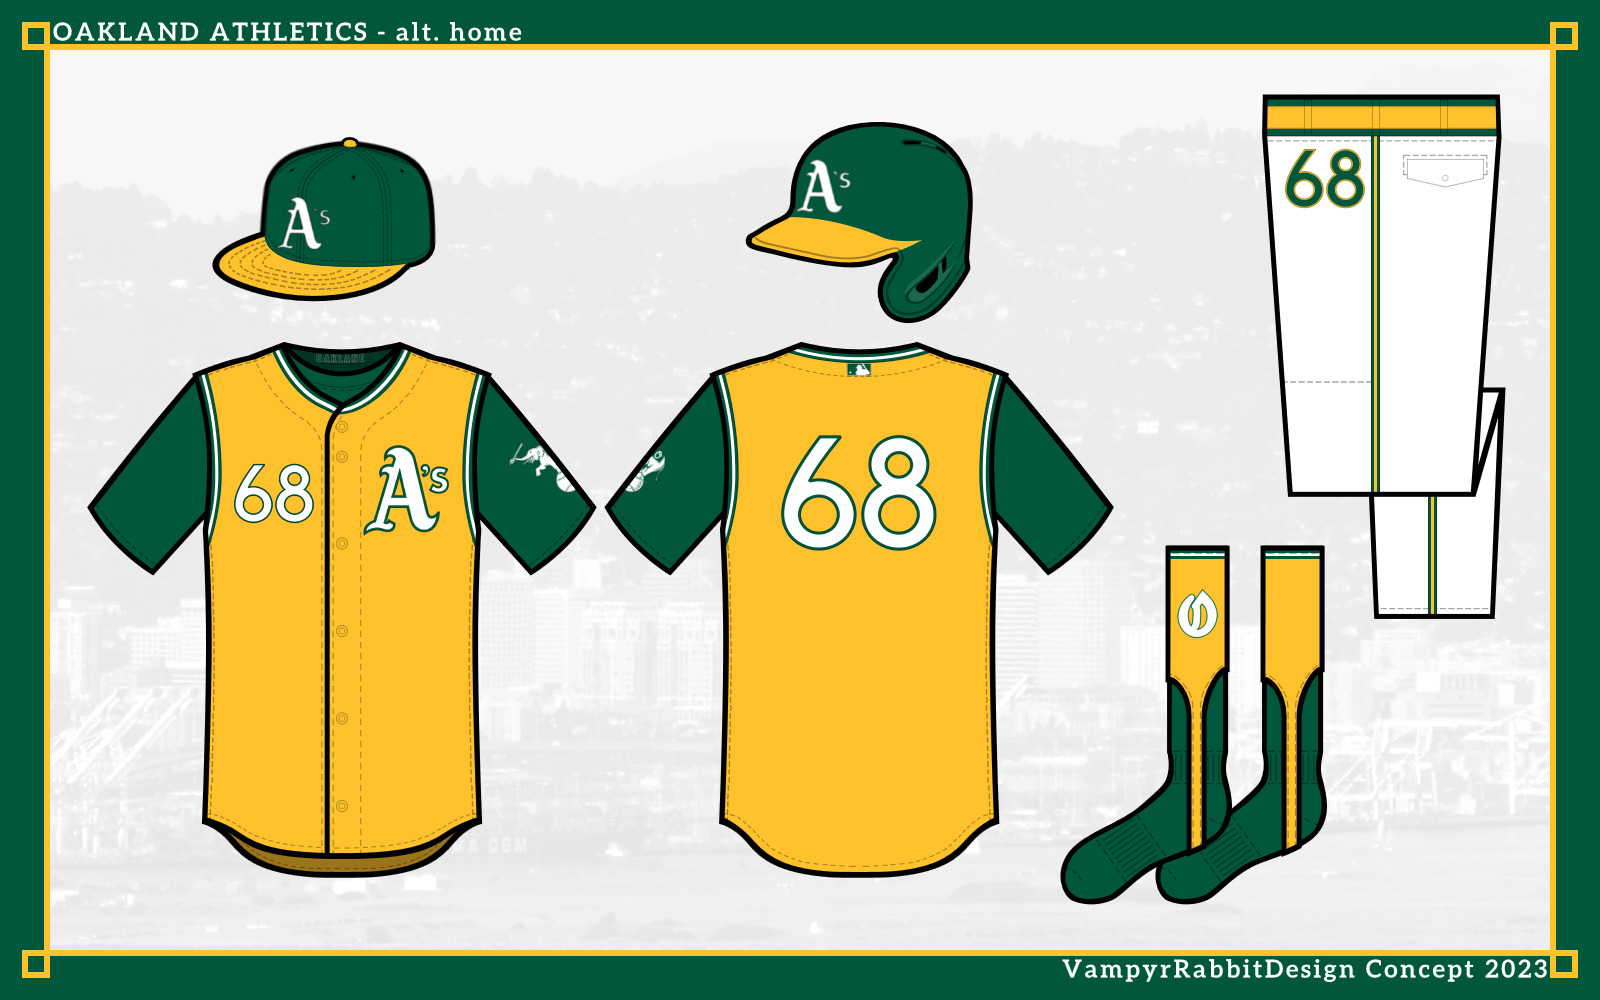 The A's - a tale of two cities. - Concepts - Chris Creamer's